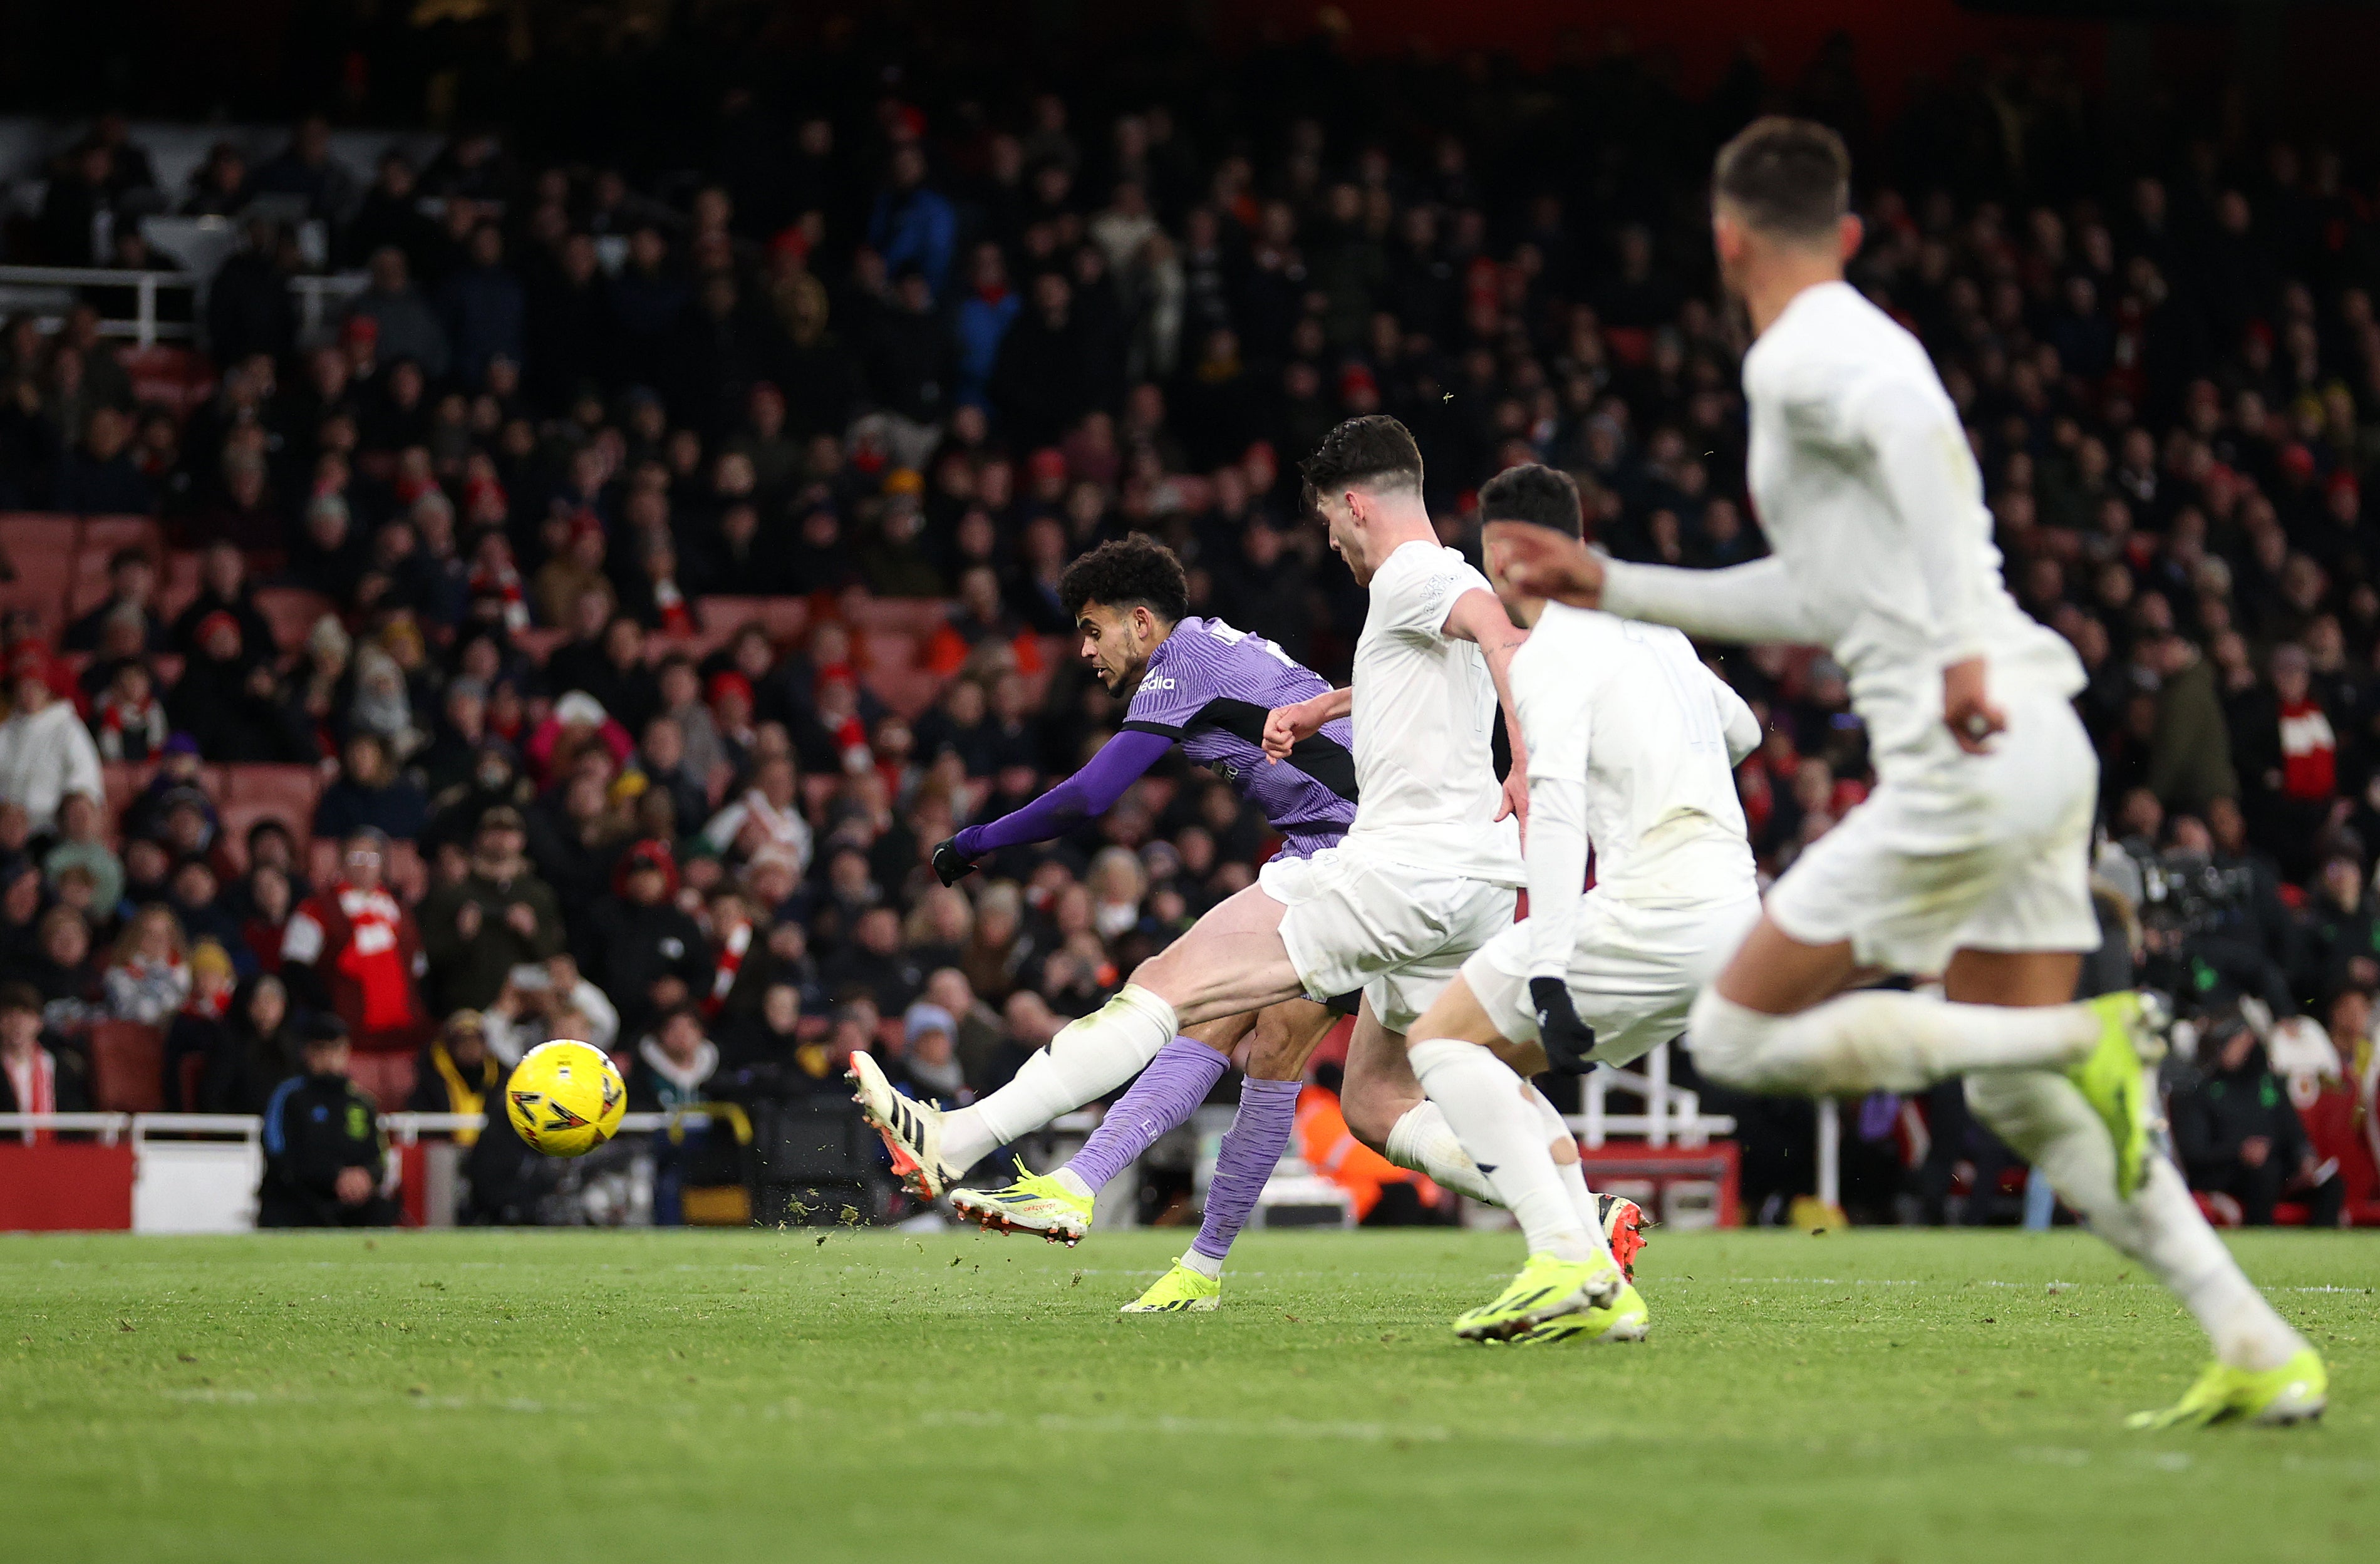 Diaz doubled Liverpool’s lead with an angled finish at the Emirates